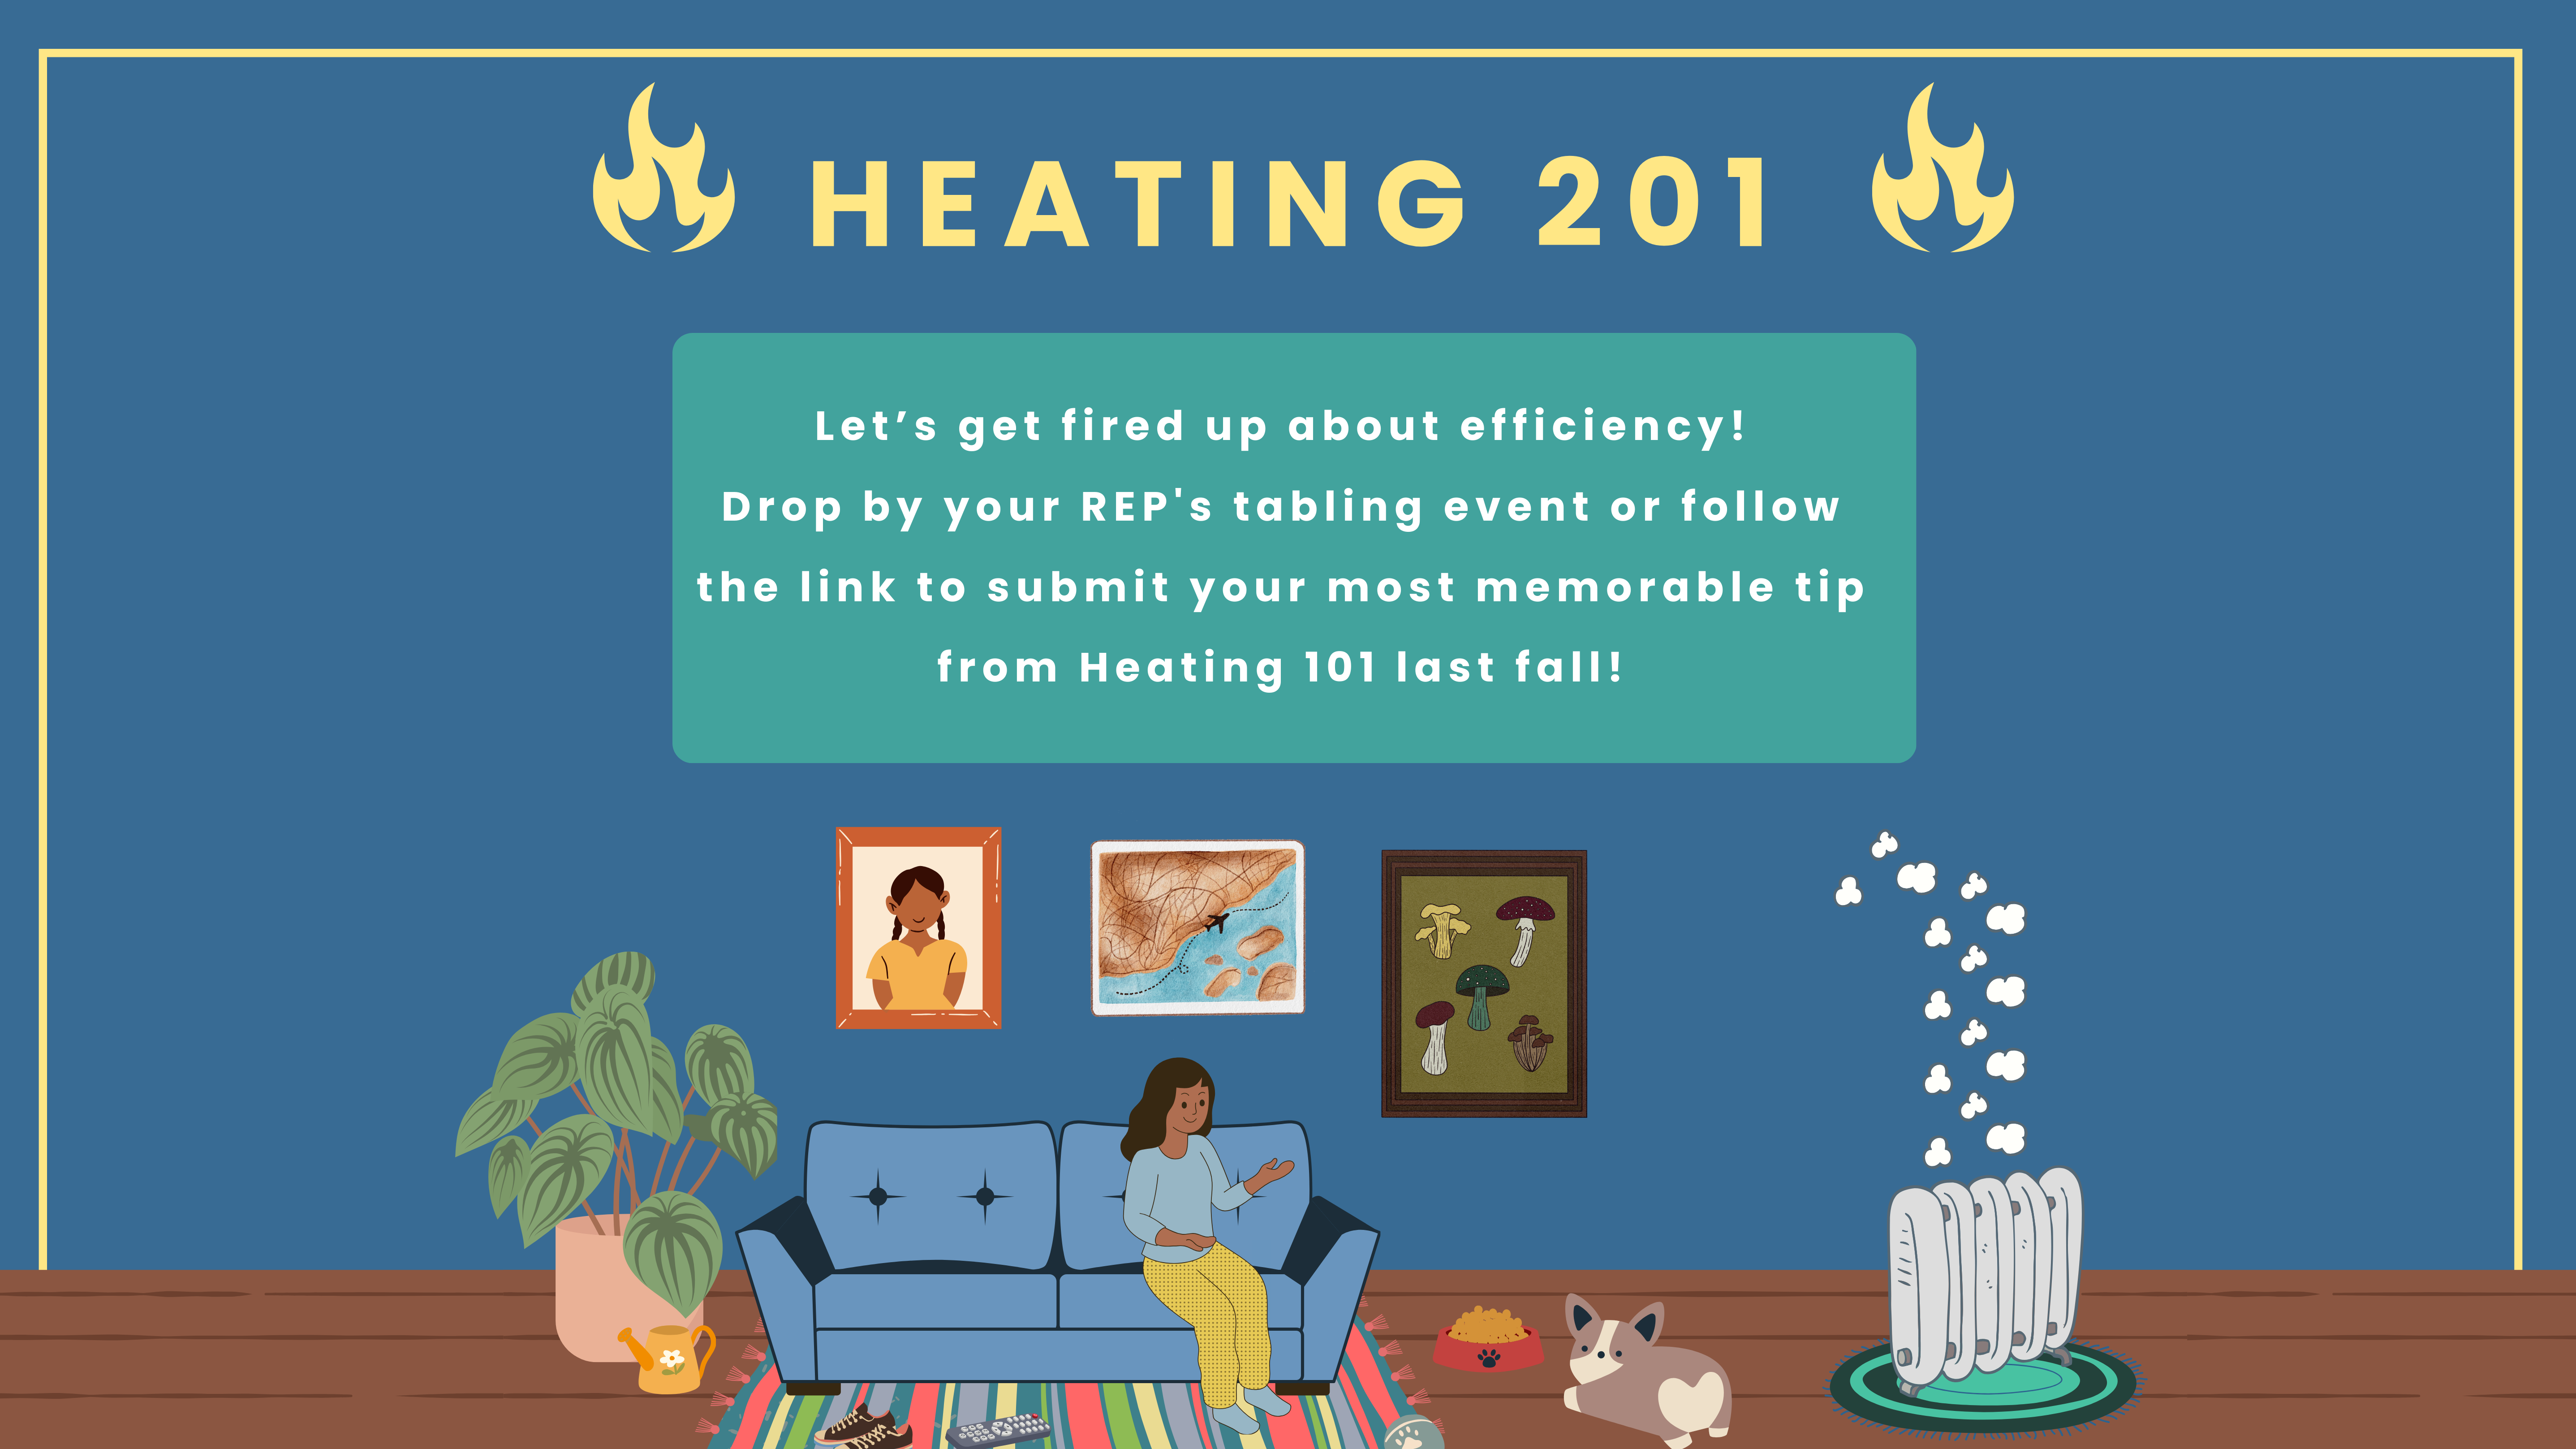 Illustration of a woman on a couch with a dog on the floor and artwork behind her. "Heating 201: Let’s get fired up about efficiency! Drop by your REP's tabling event or follow the link to submit your most memorable tip from Heating 101 last fall!"